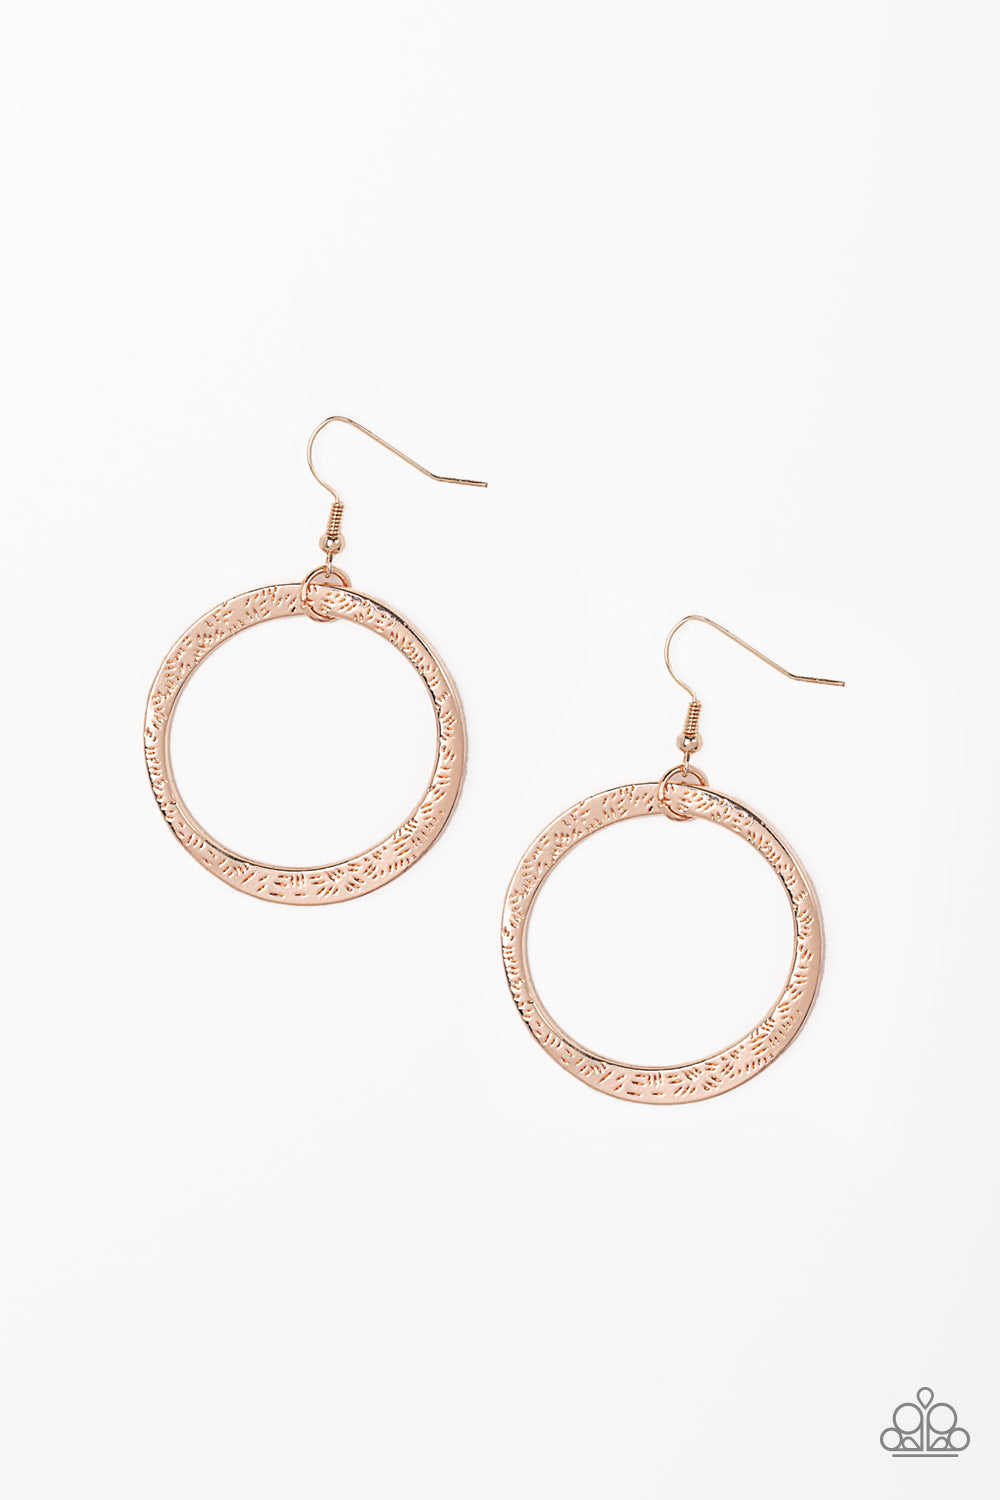 Paparazzi Accessories Wildly Wild - Rose Gold Earring - Be Adored Jewelry